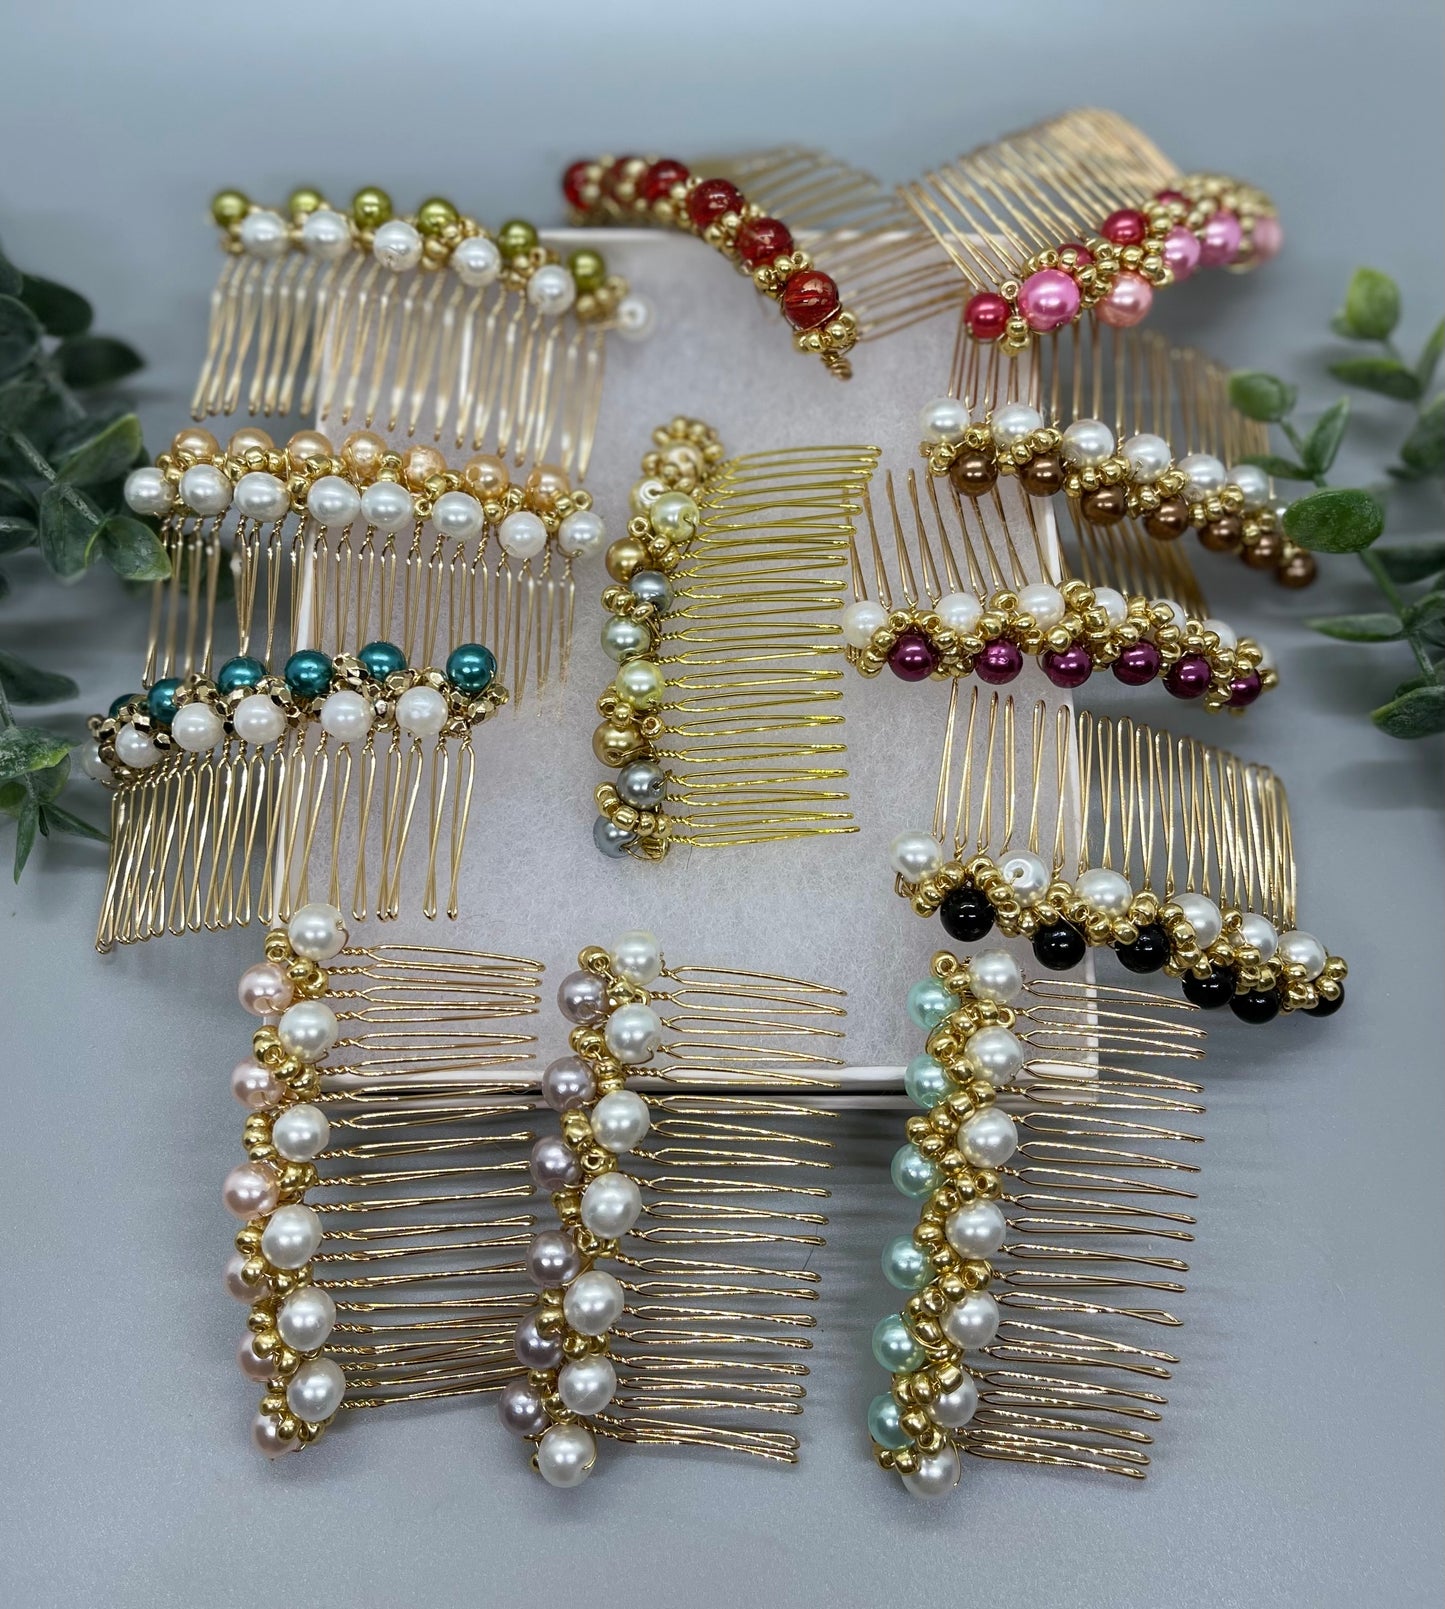 Neutral  gold beaded side Comb 3.5” gold Metal hair Accessories bridesmaid birthday princess wedding gift handmade accessories